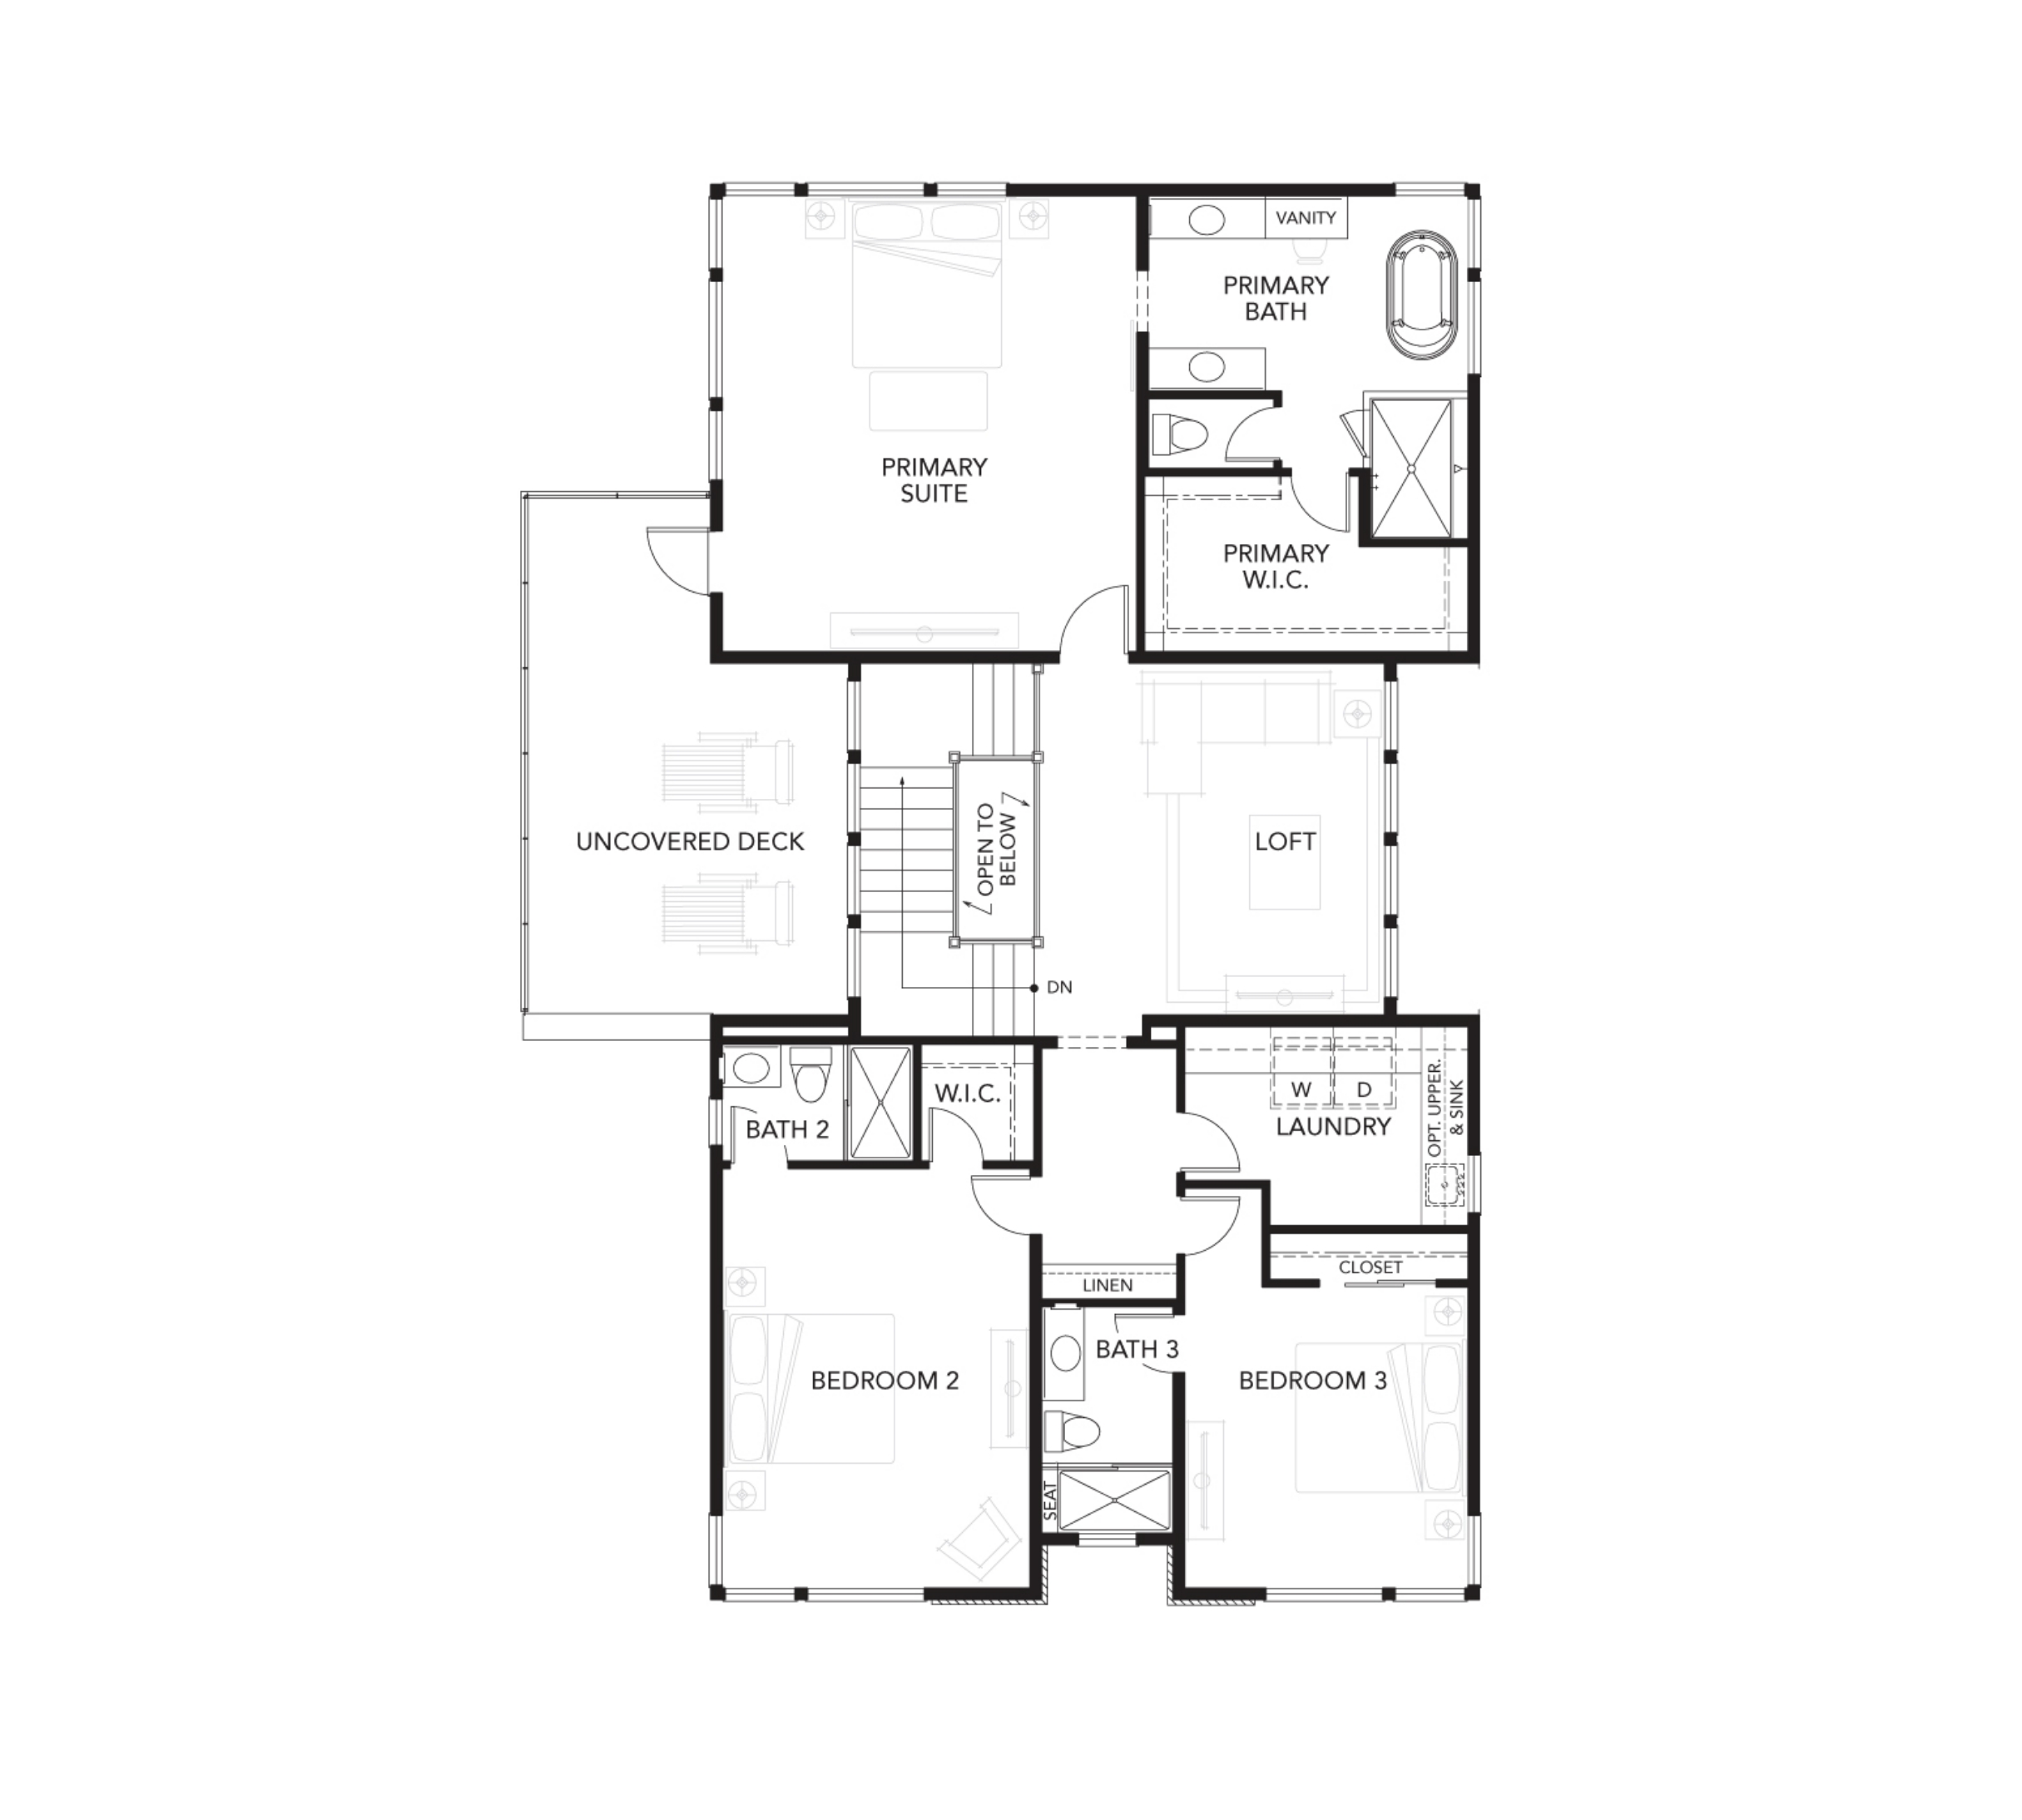 Haven Development's second floor Plan for elevation 4A of the Legacy at Lucas Valley new home development in Marin County, CA